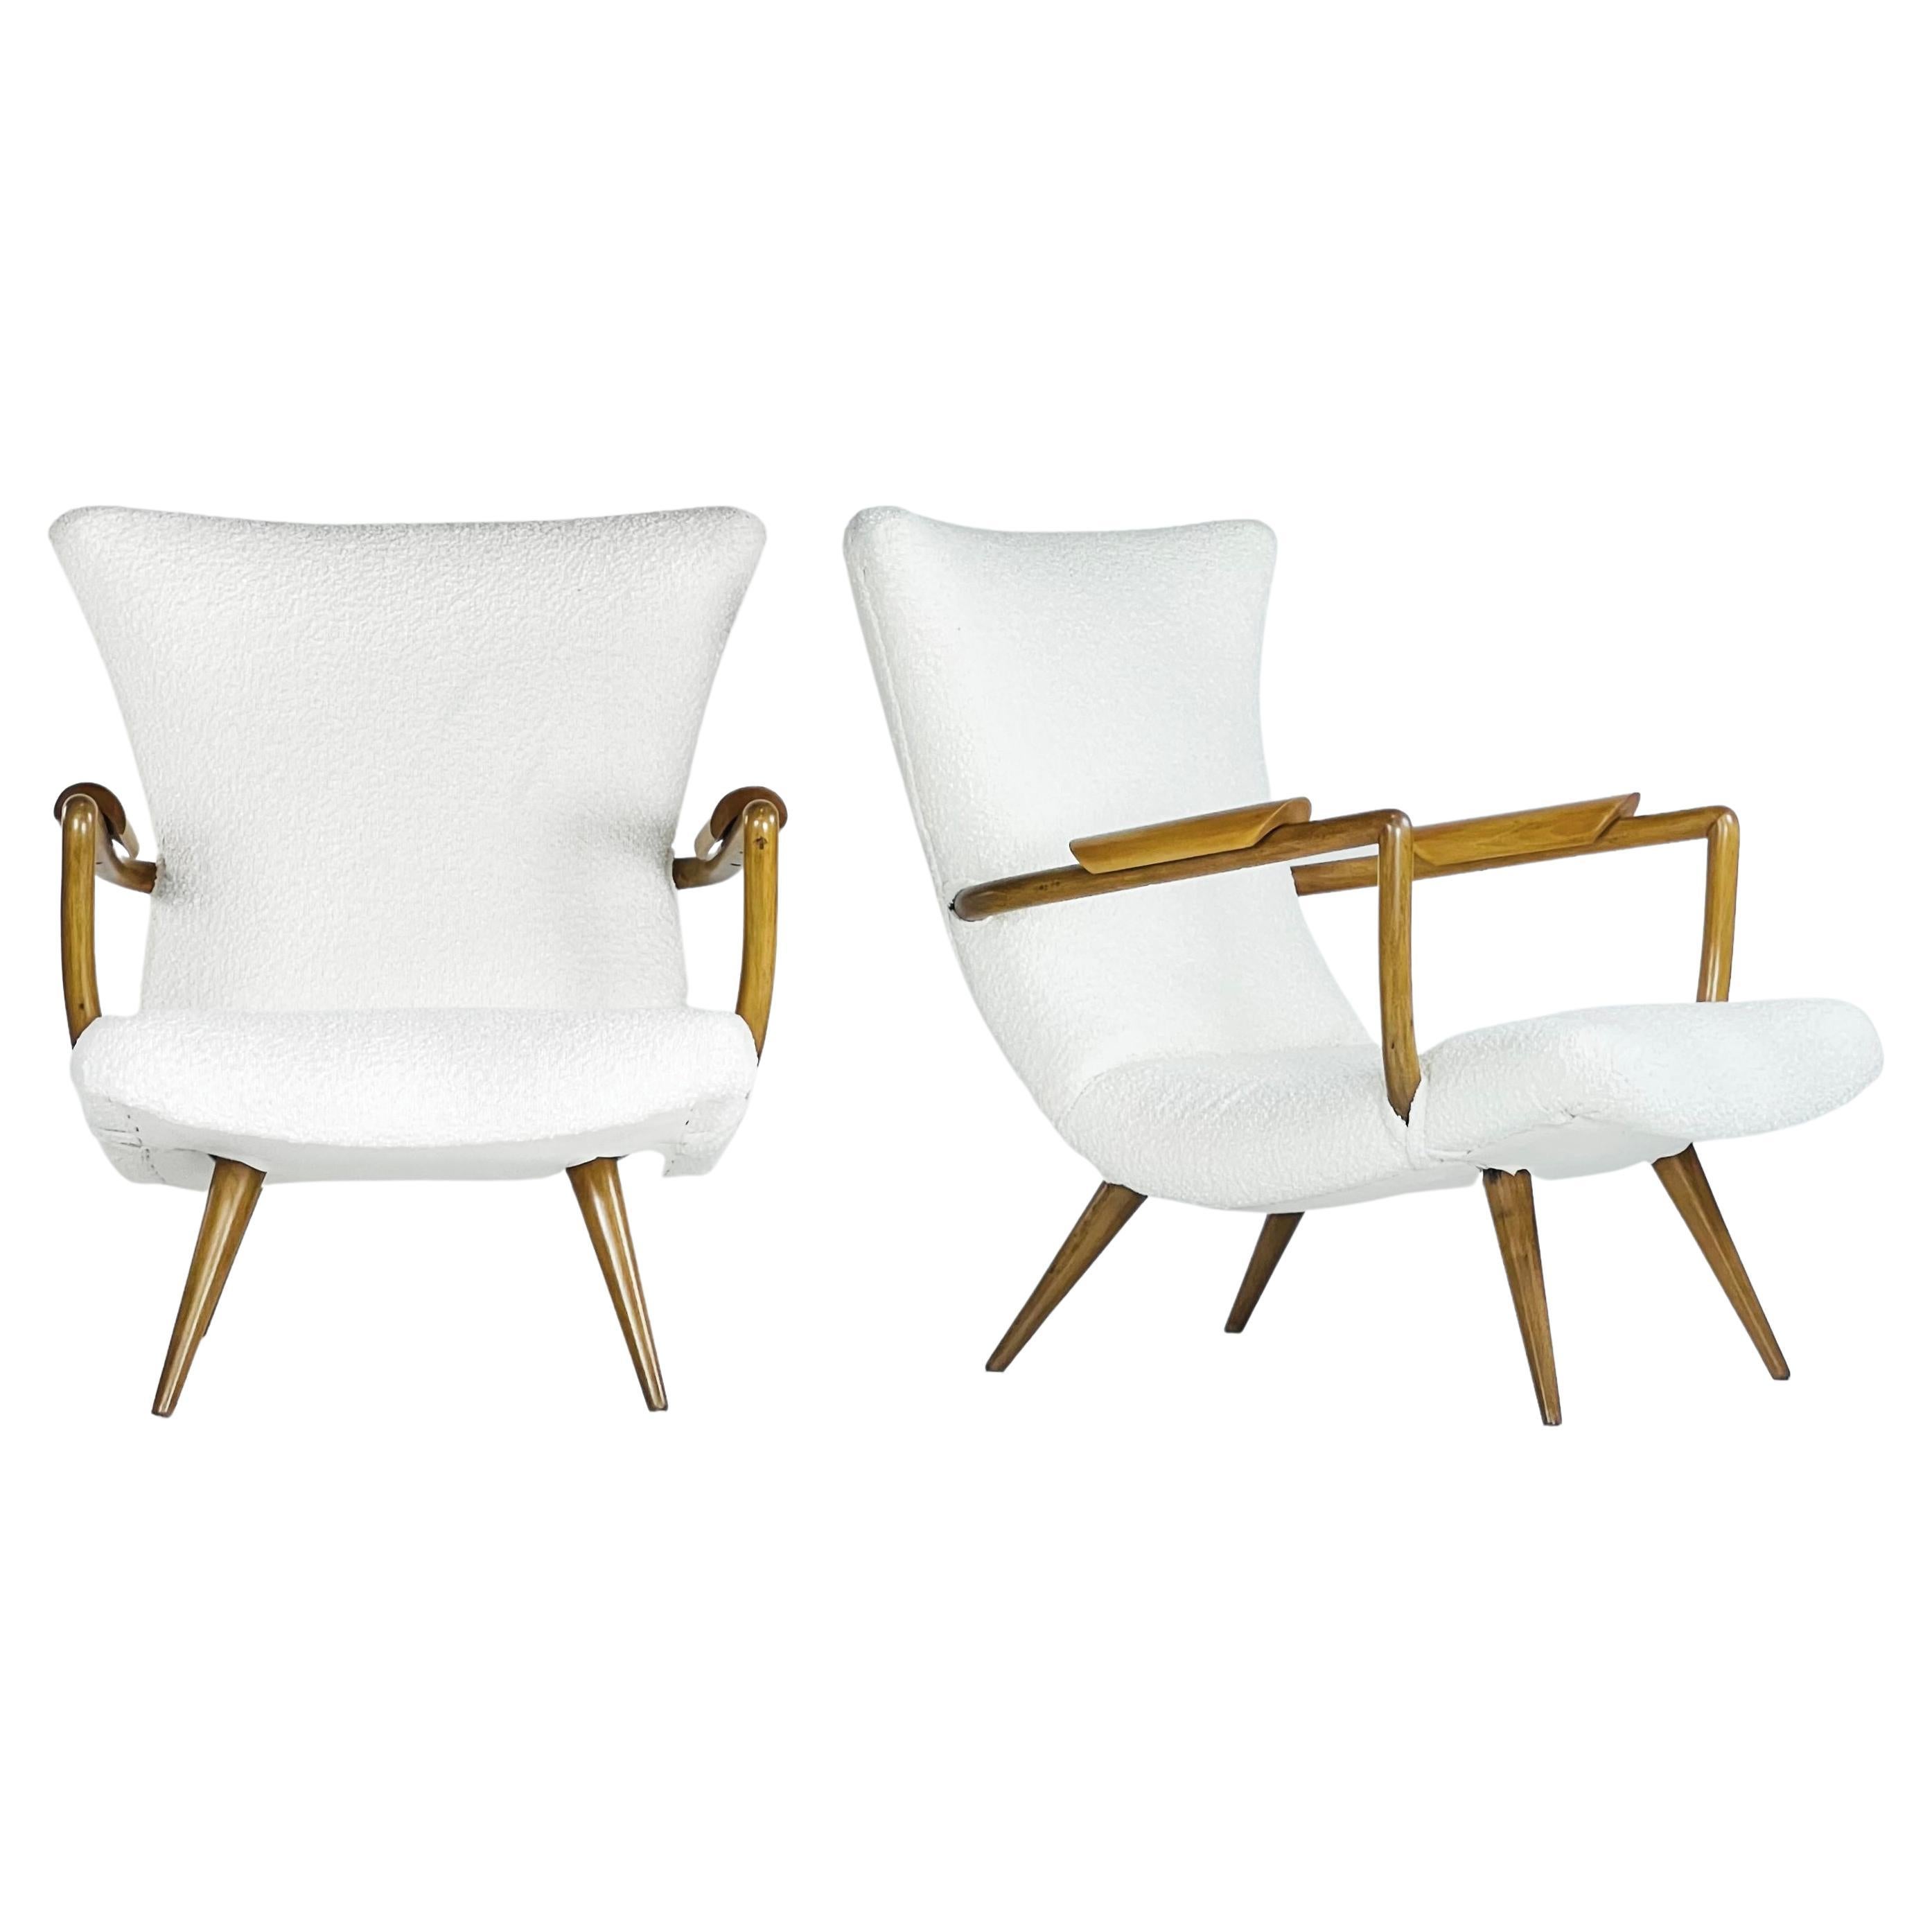 Pair of Lounge Chairs in Caviúna Wood Brazil 1950s Designer Giuseppe Scapinelli